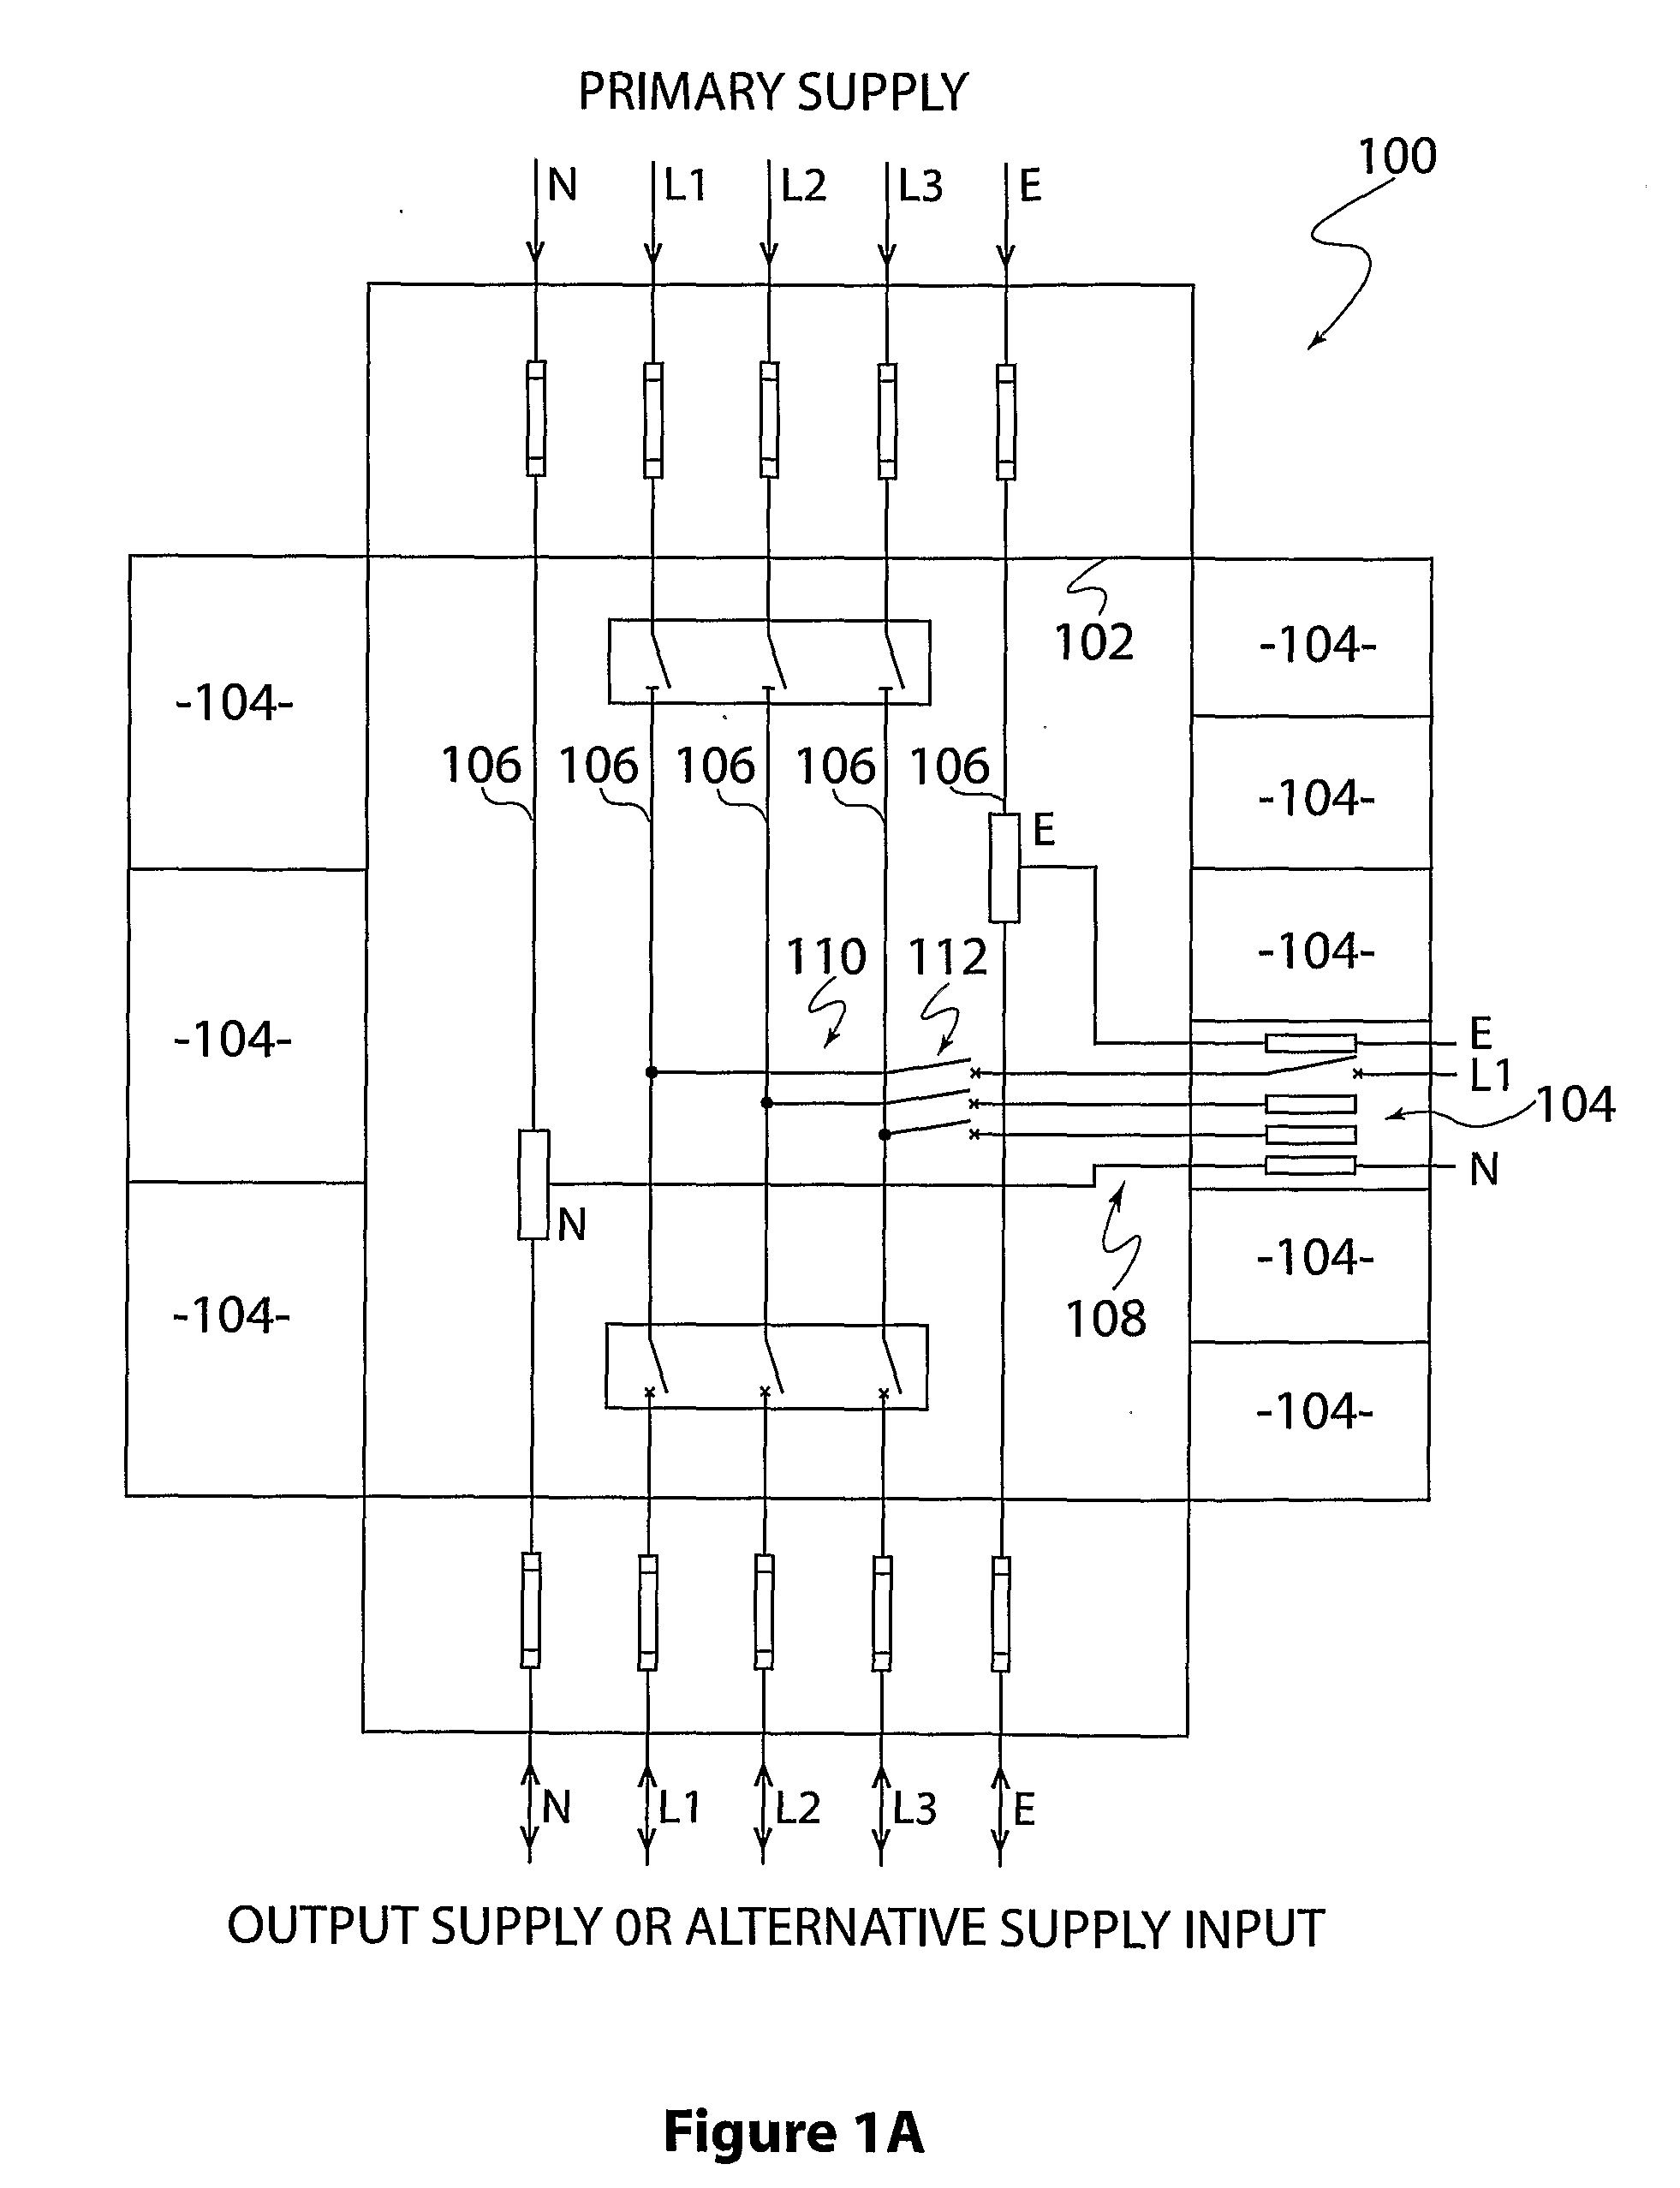 Power distribution system with individually isolatable functional zones